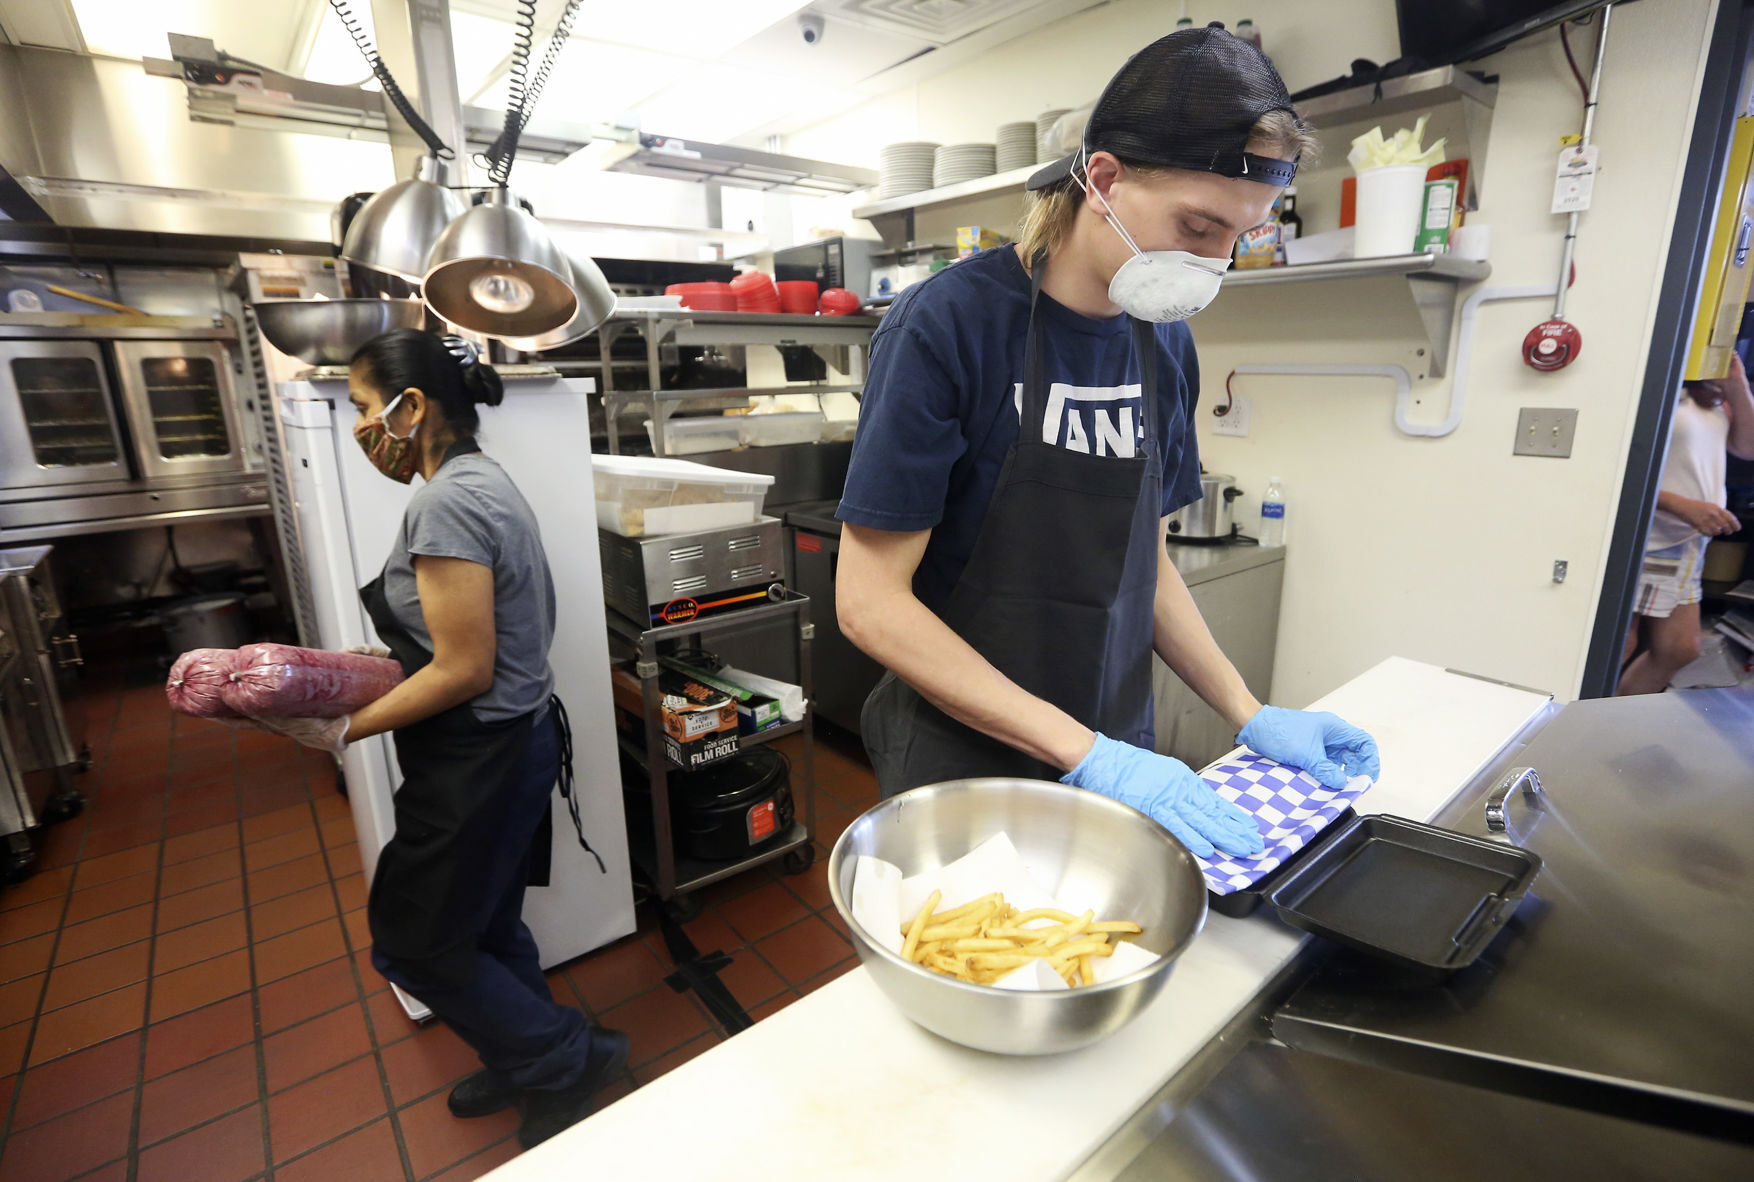 Celia Berez (left) and Hank Peterson prepare food at Frentress Lake Bar & Grill in East Dubuque, Ill., on Thursday, July 16, 2020. PHOTO CREDIT: NICKI KOHL